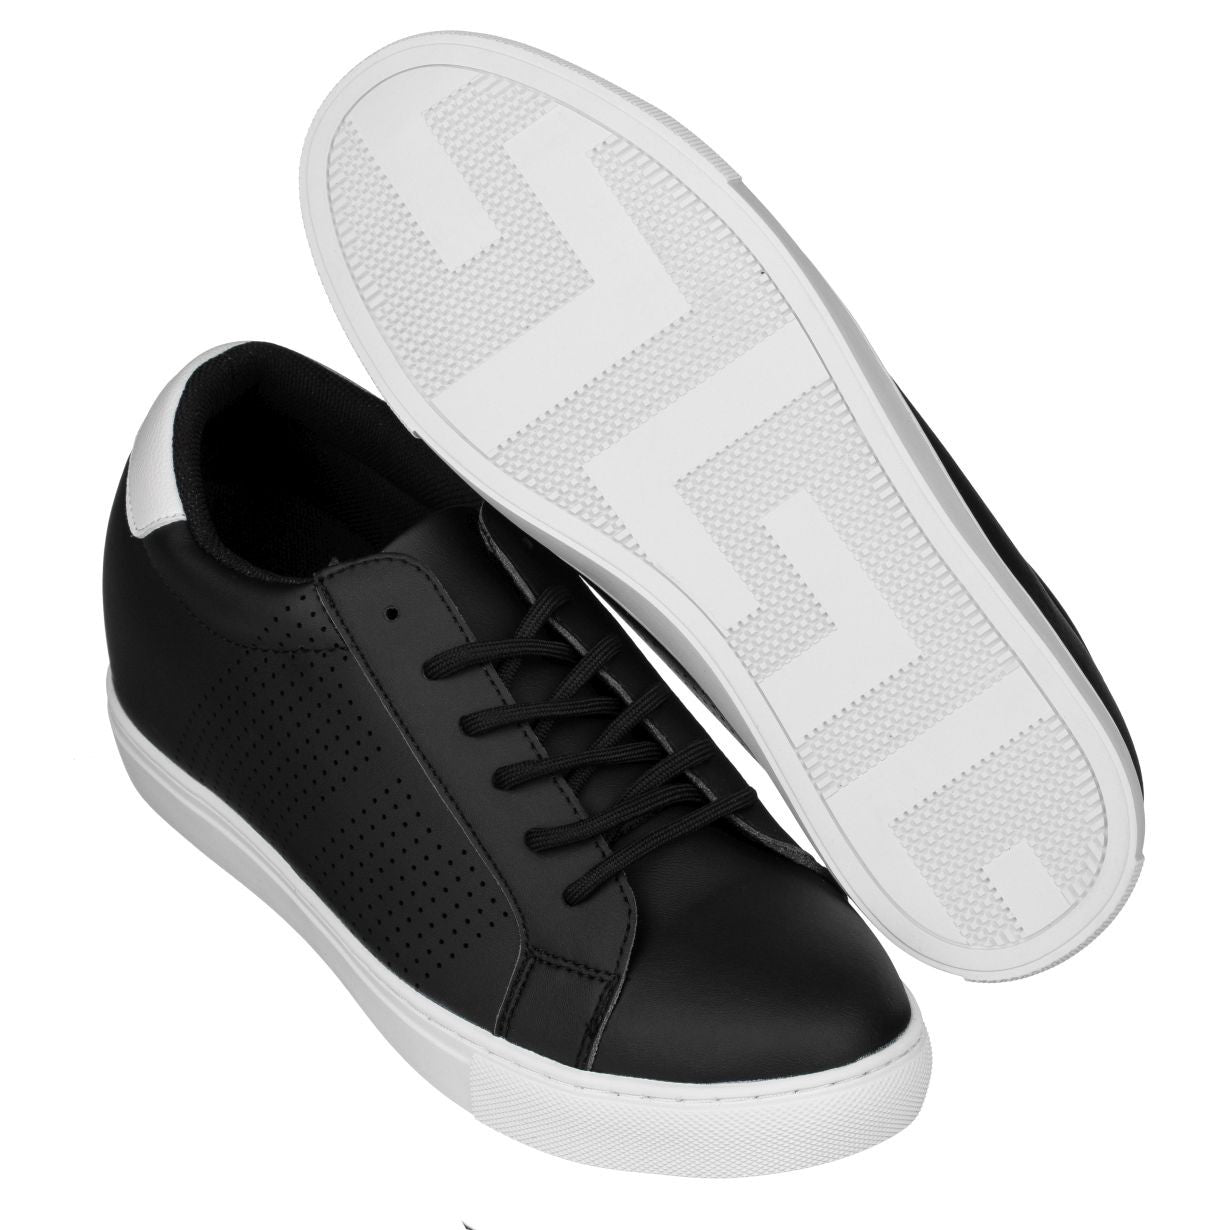 Elevator shoes height increase CALTO - H0831 - 2.6 Inches Taller (Black) - Lightweight